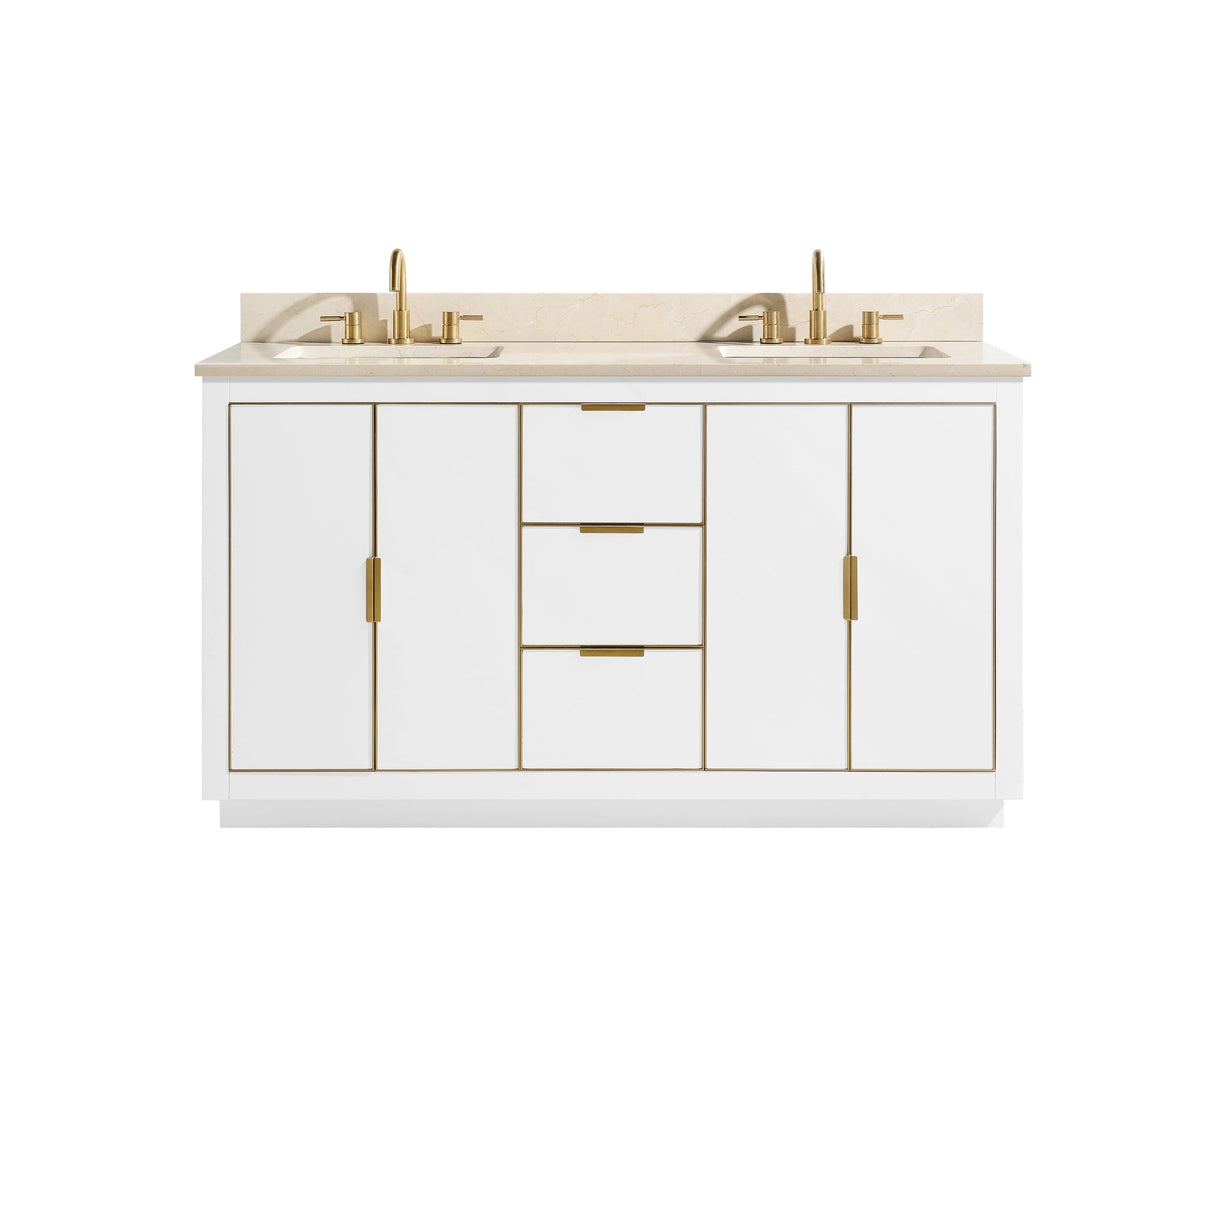 Avanity Austen 61 in. Vanity Combo in White with Gold Trim and Crema Marfil Marble Top